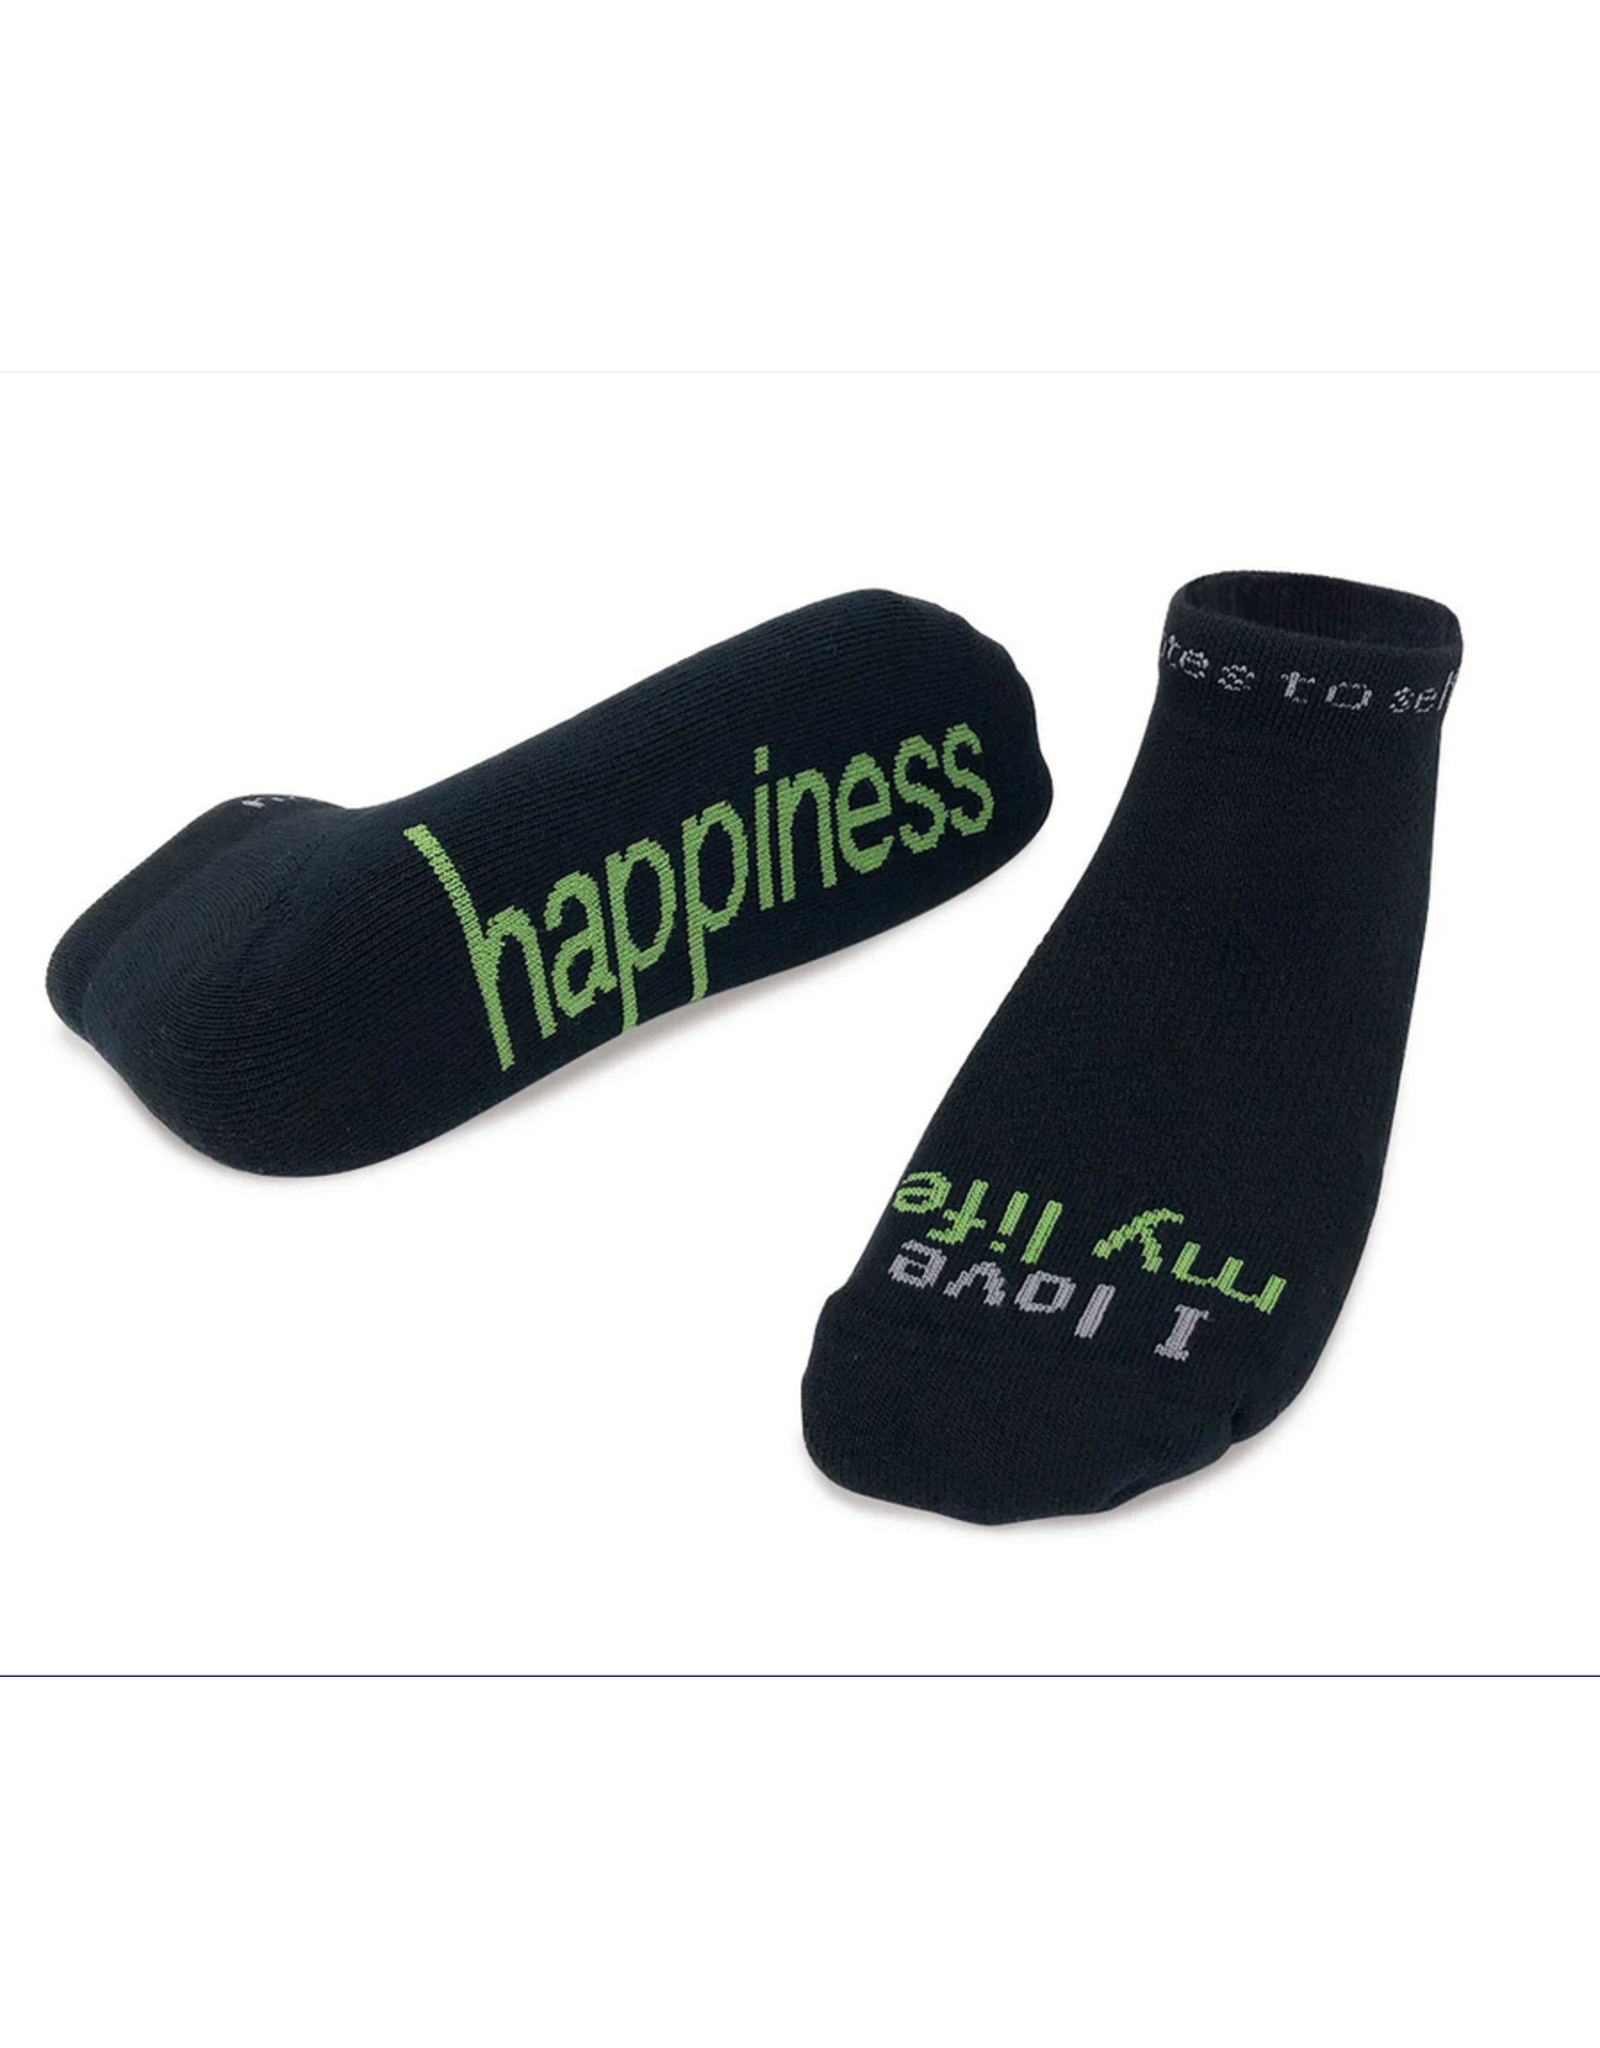 notes to self Notes to Self Happiness “I love my life” Low cut socks